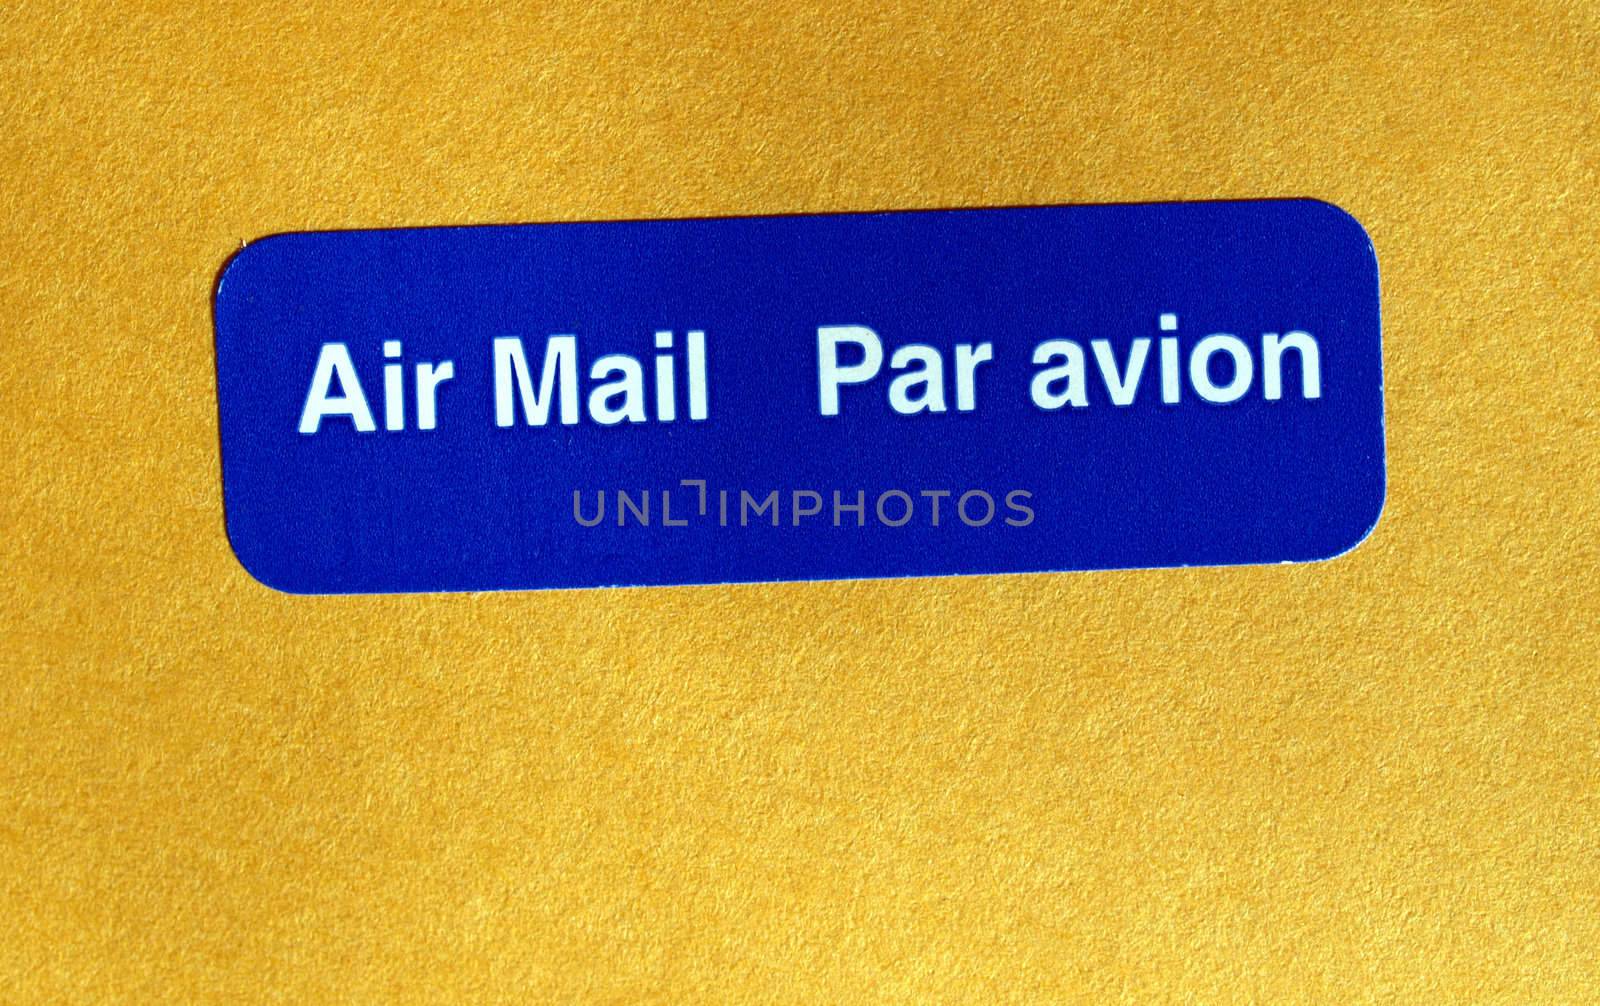 Airmail by paolo77